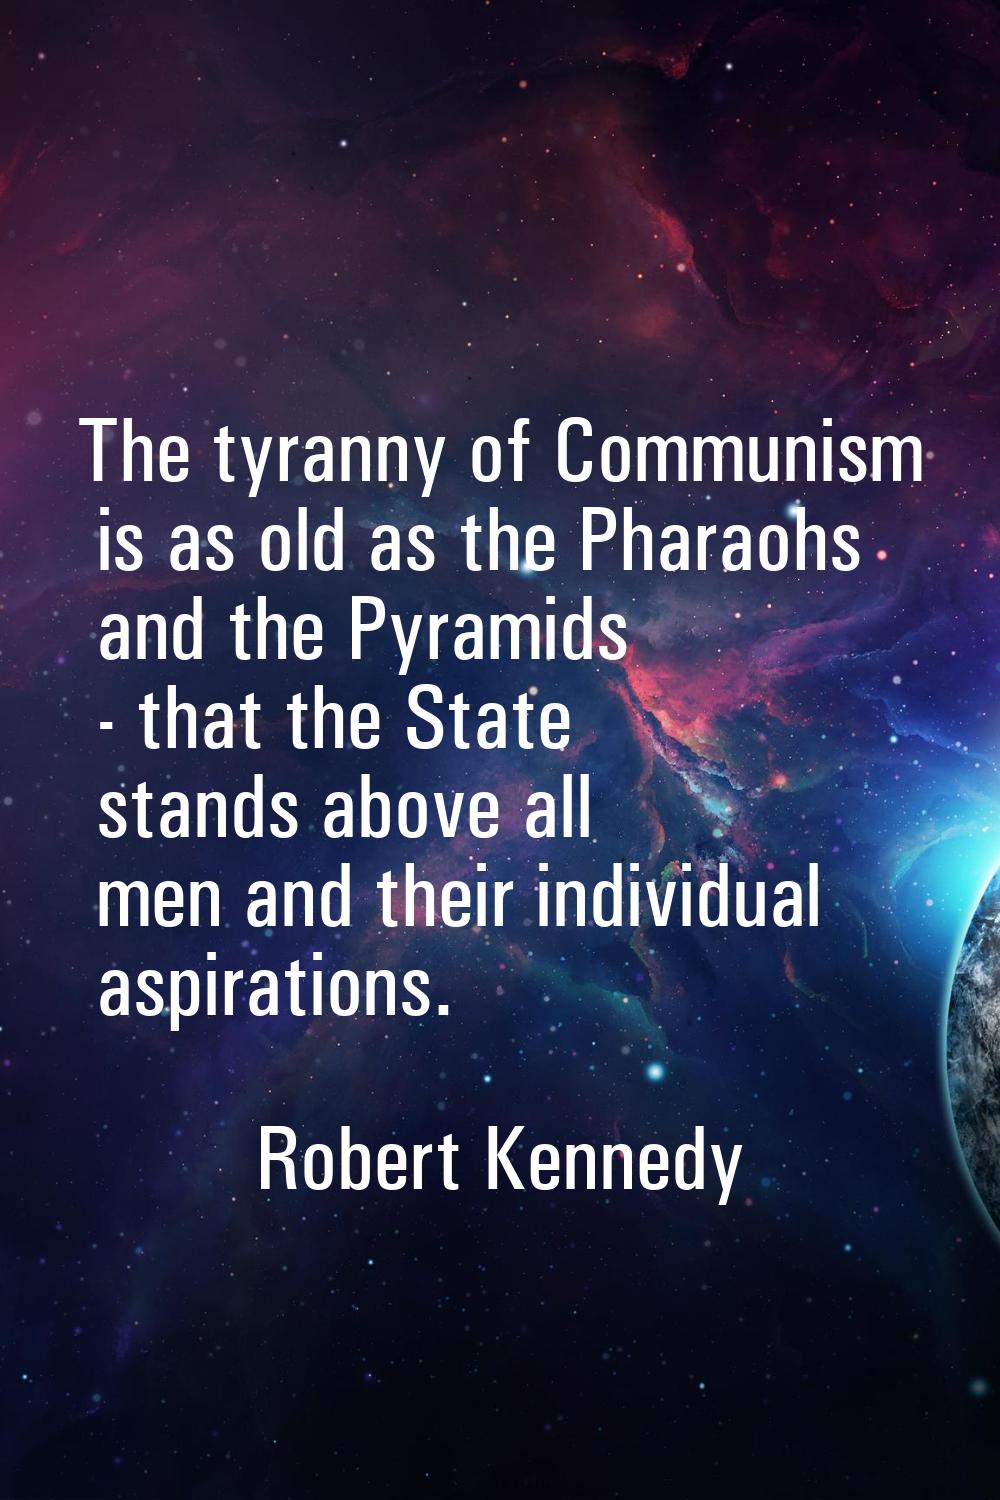 The tyranny of Communism is as old as the Pharaohs and the Pyramids - that the State stands above a